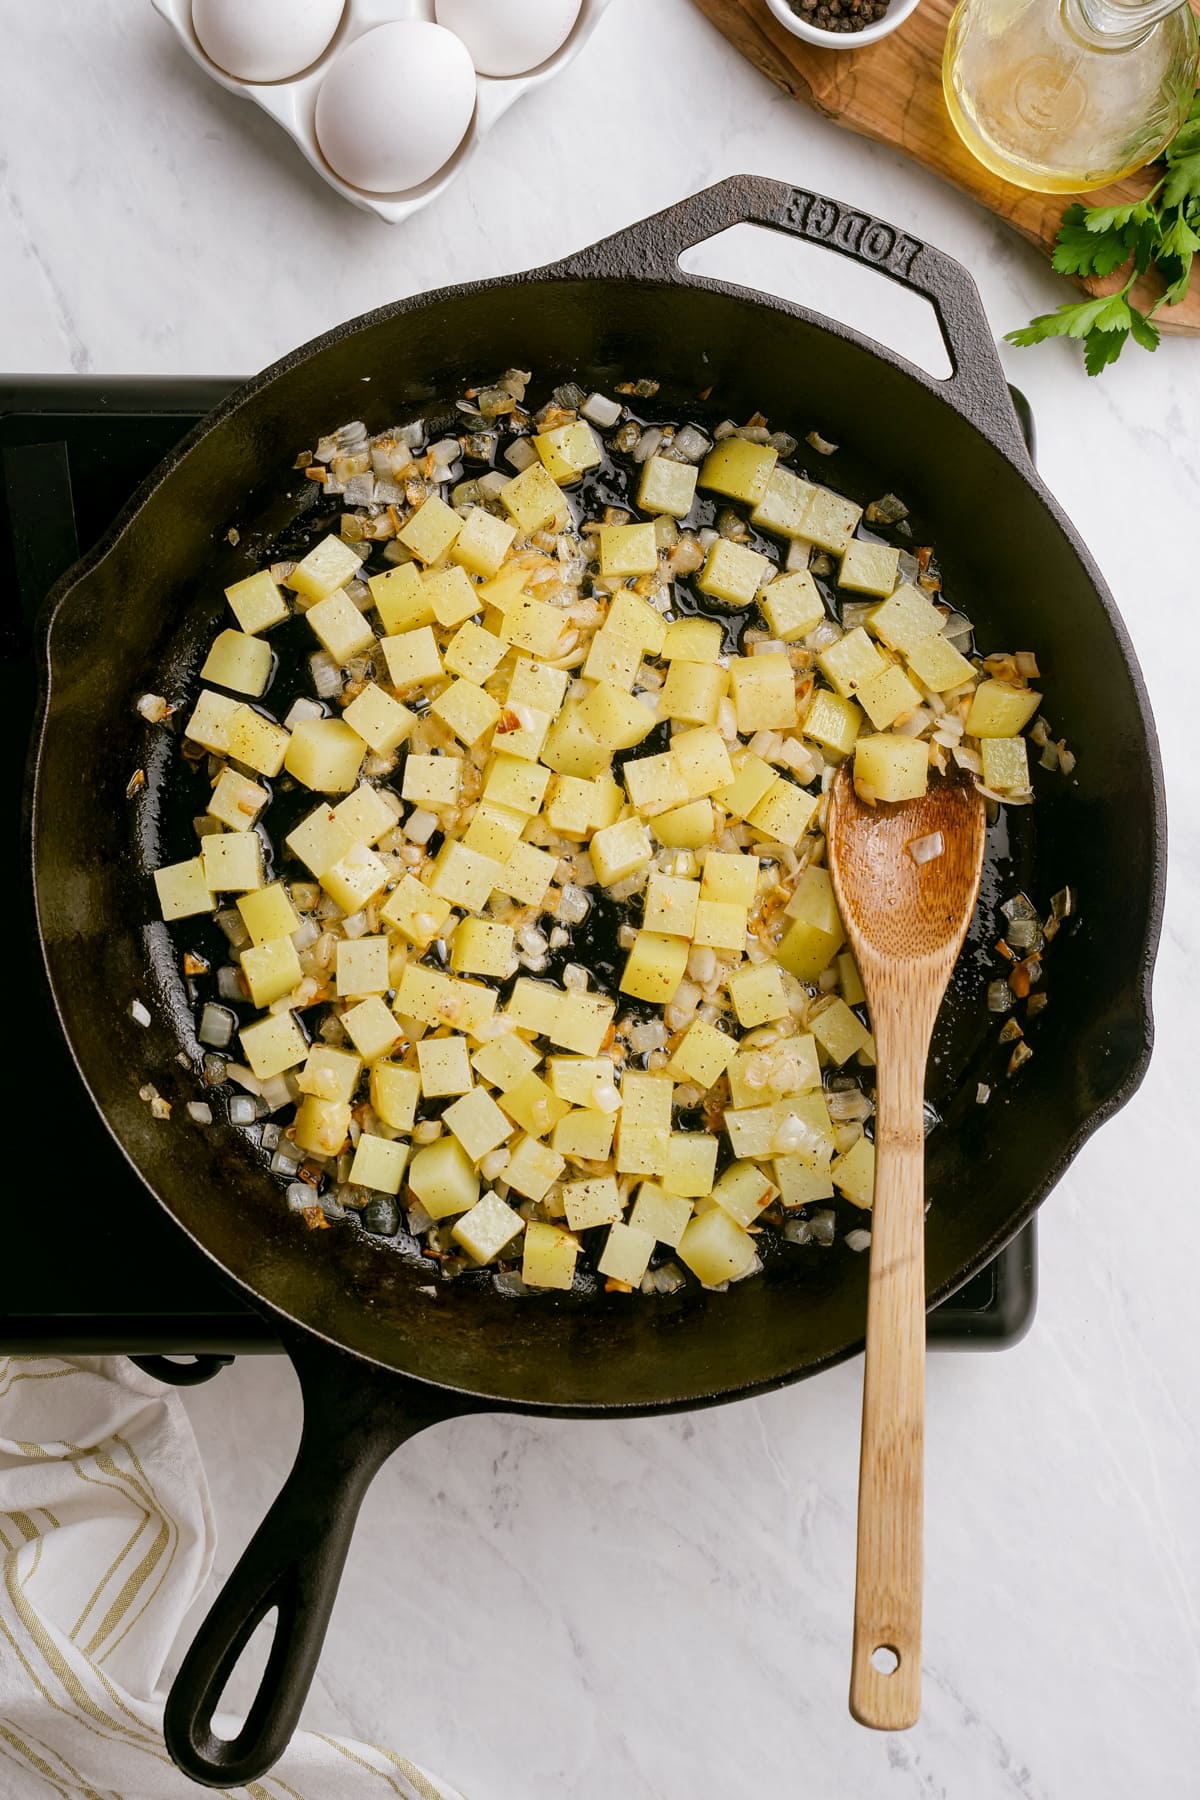 diced potatoes in cooking in a skillet